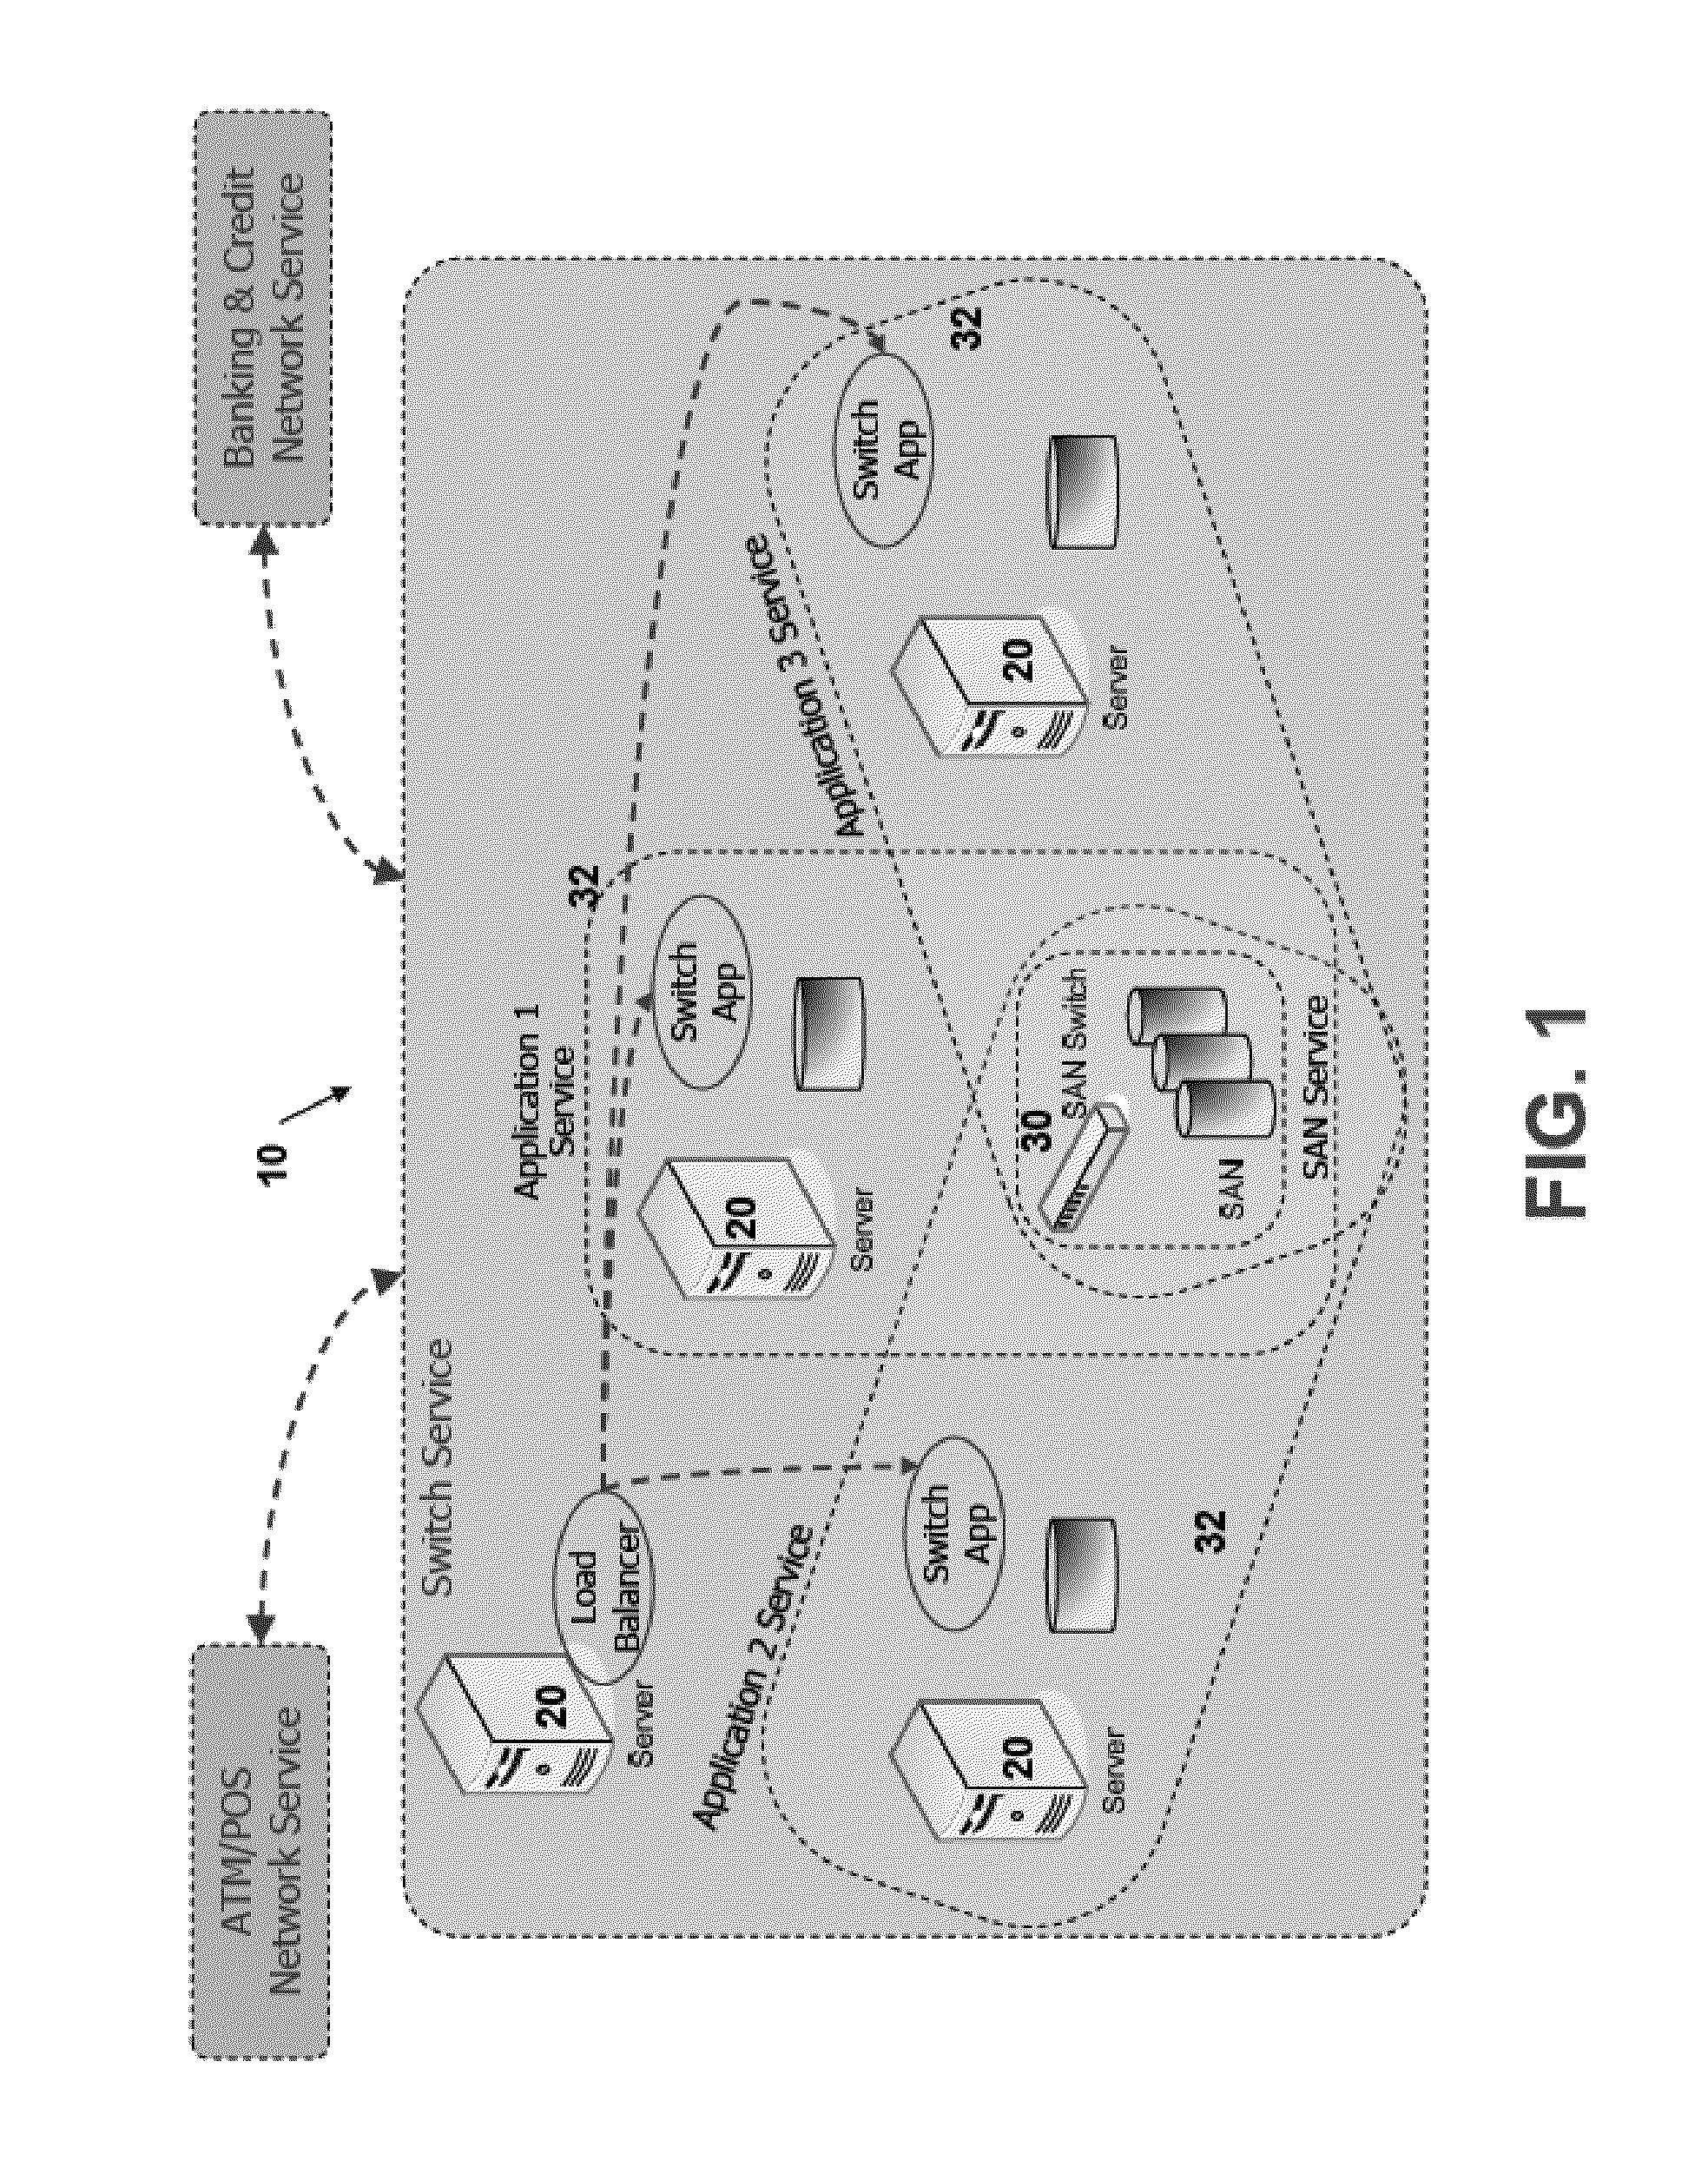 Systems and Methods for Managing Multi-Component Systems in an Infrastructure